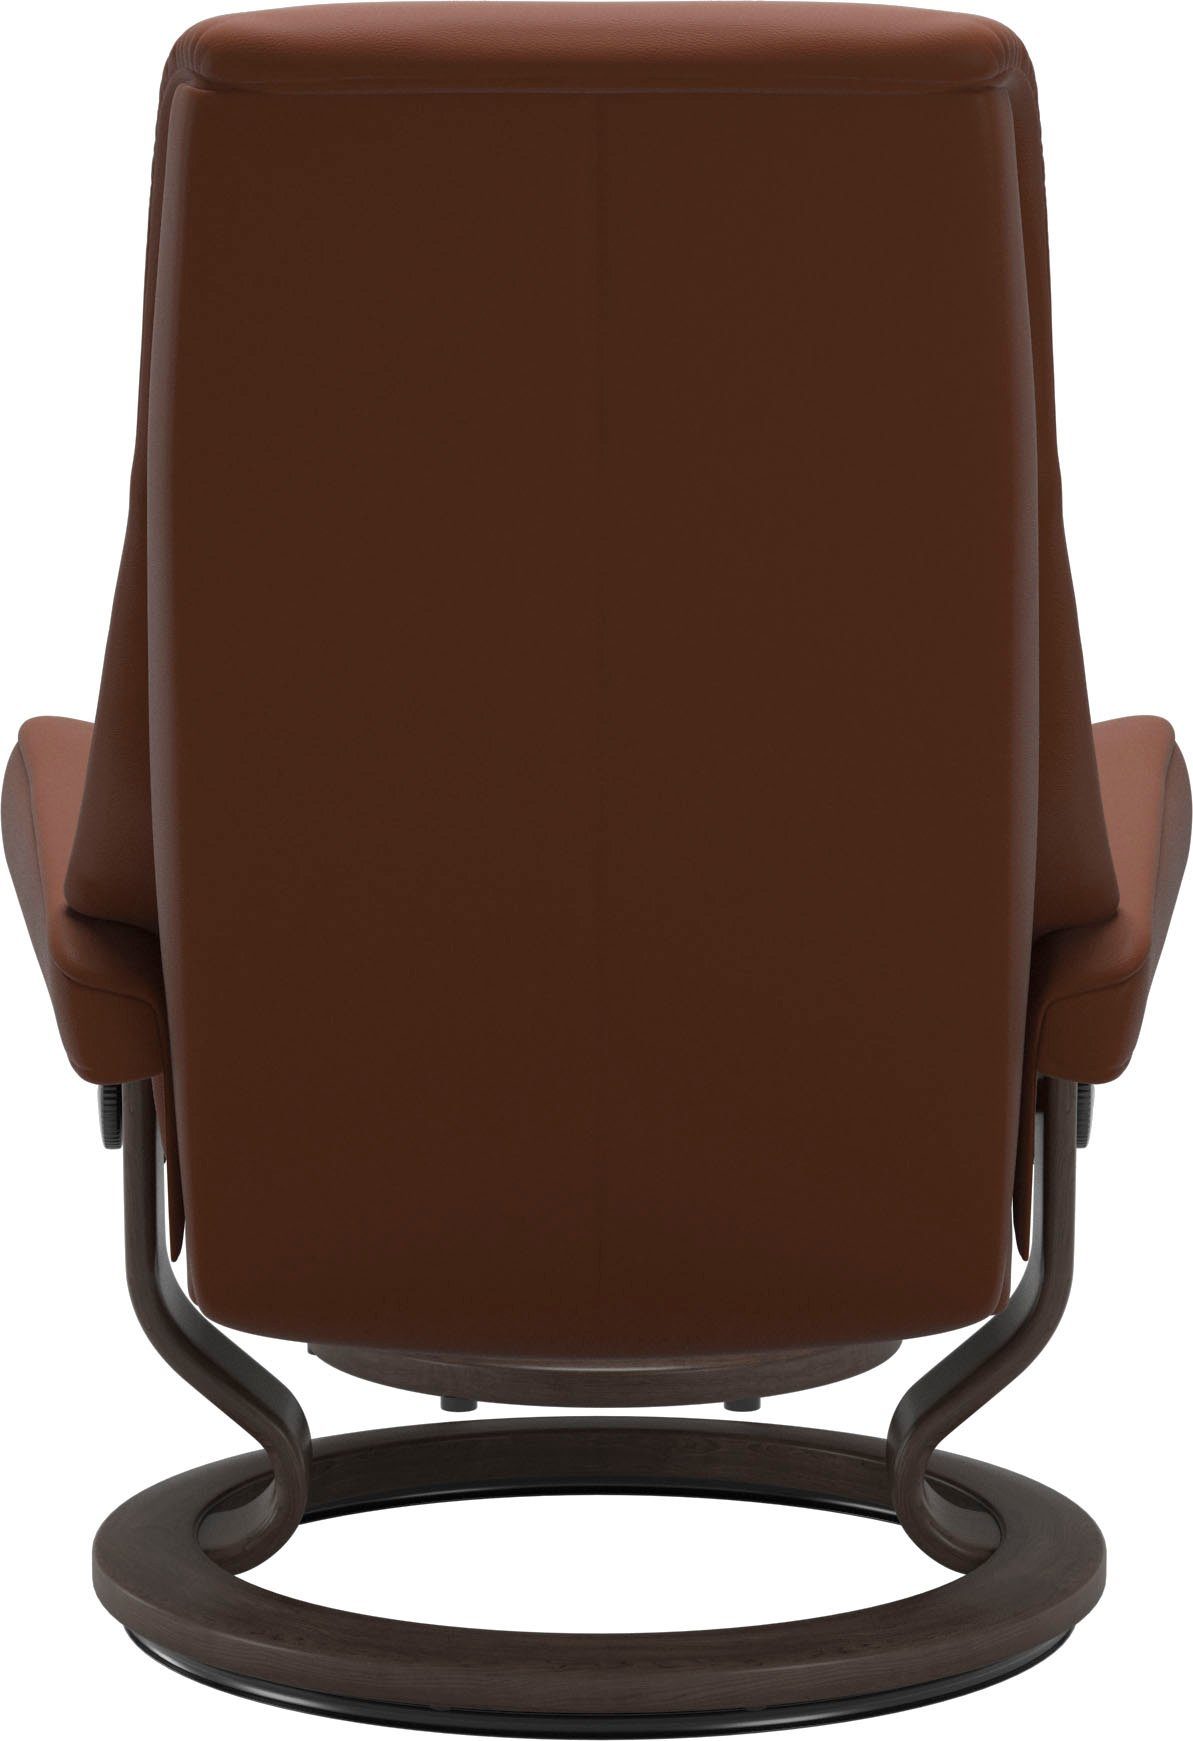 Classic Stressless® View, Größe Base, L,Gestell mit Wenge Relaxsessel